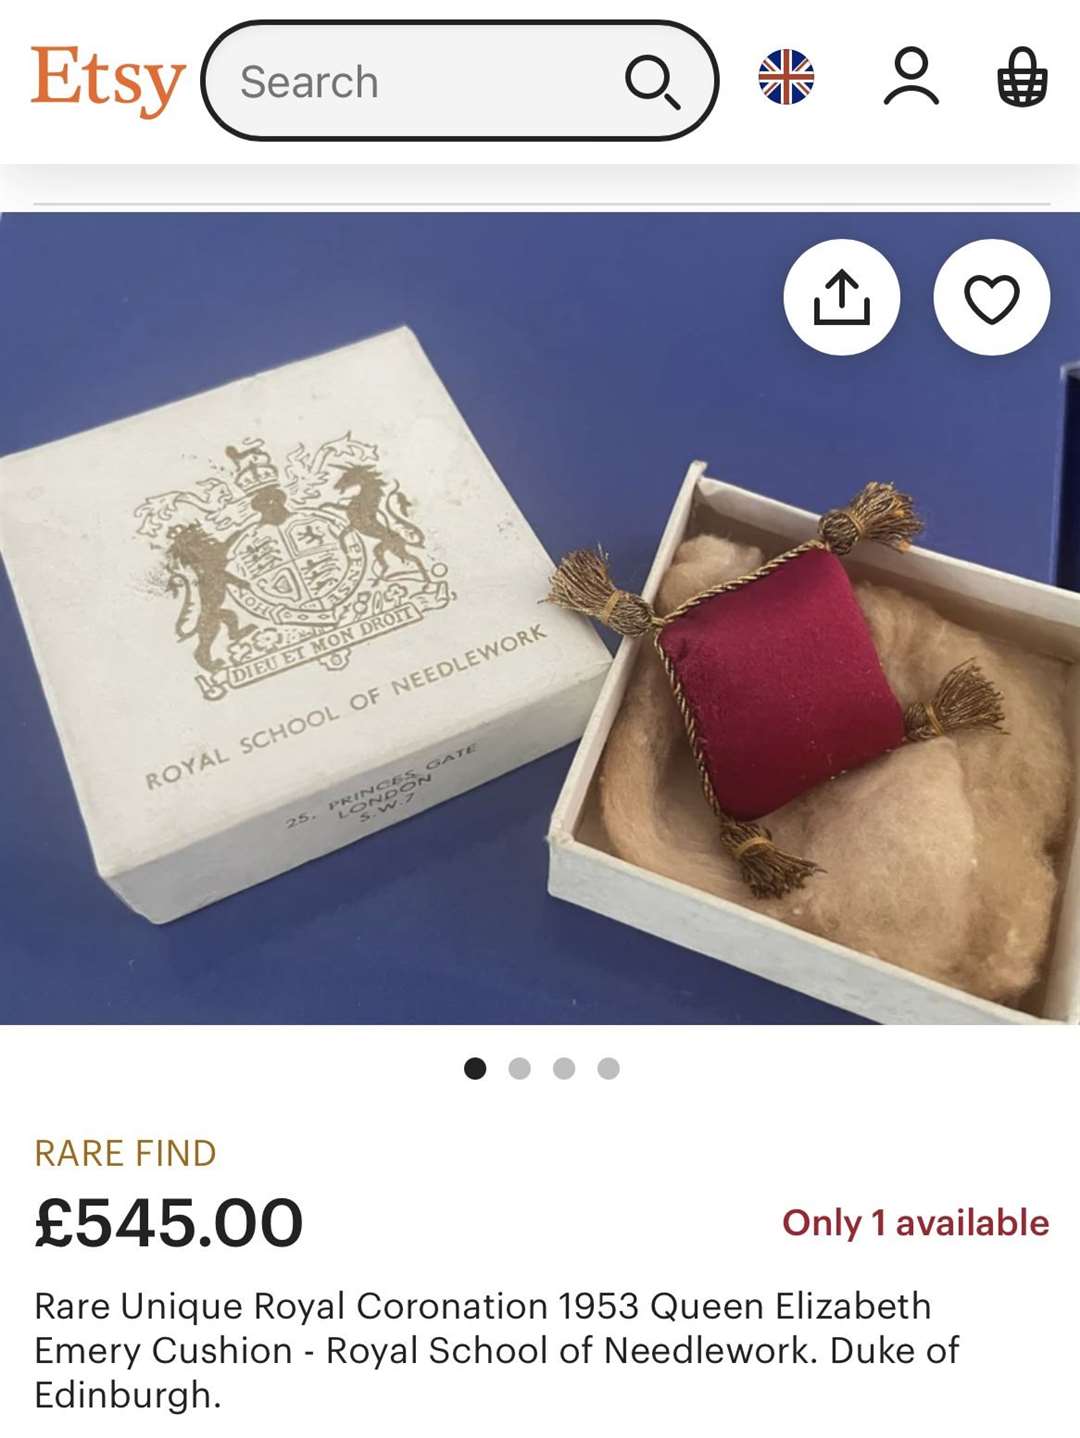 The listing for the emery cushion has one product priced at more than £500